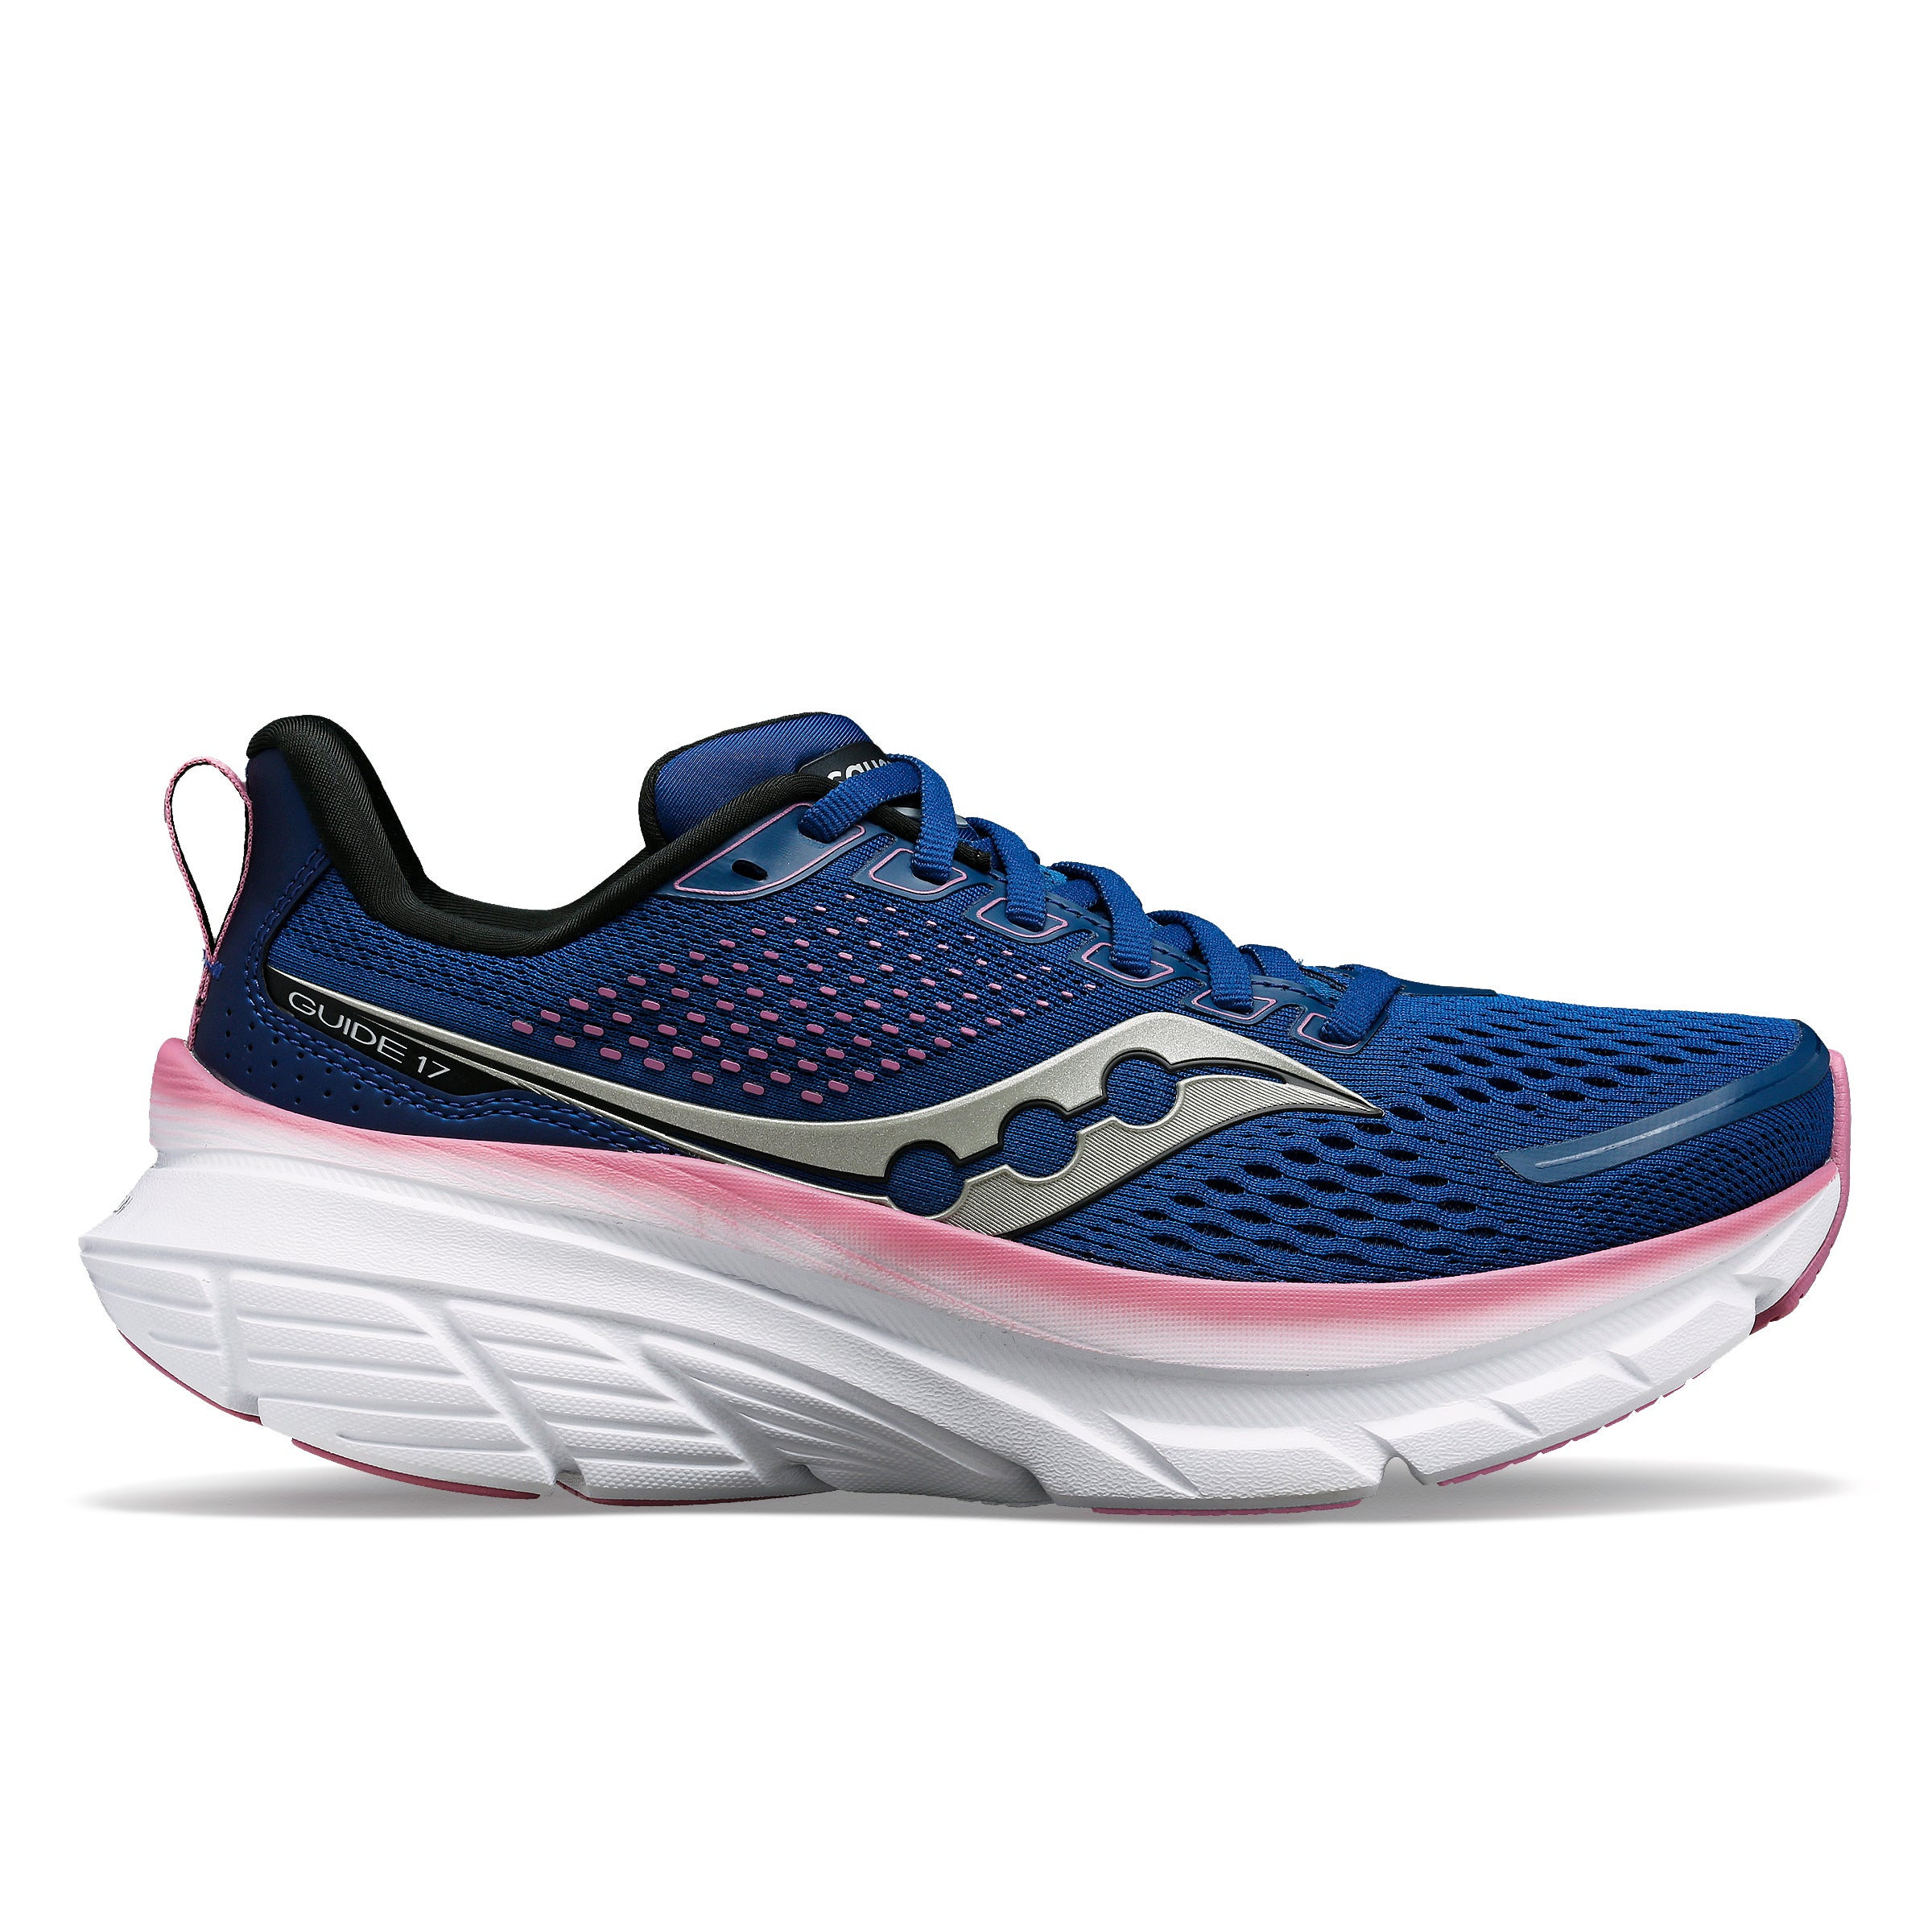 SAUCONY WOMEN'S GUIDE 17 - B - 106 NAVY/ORCHID 5.0